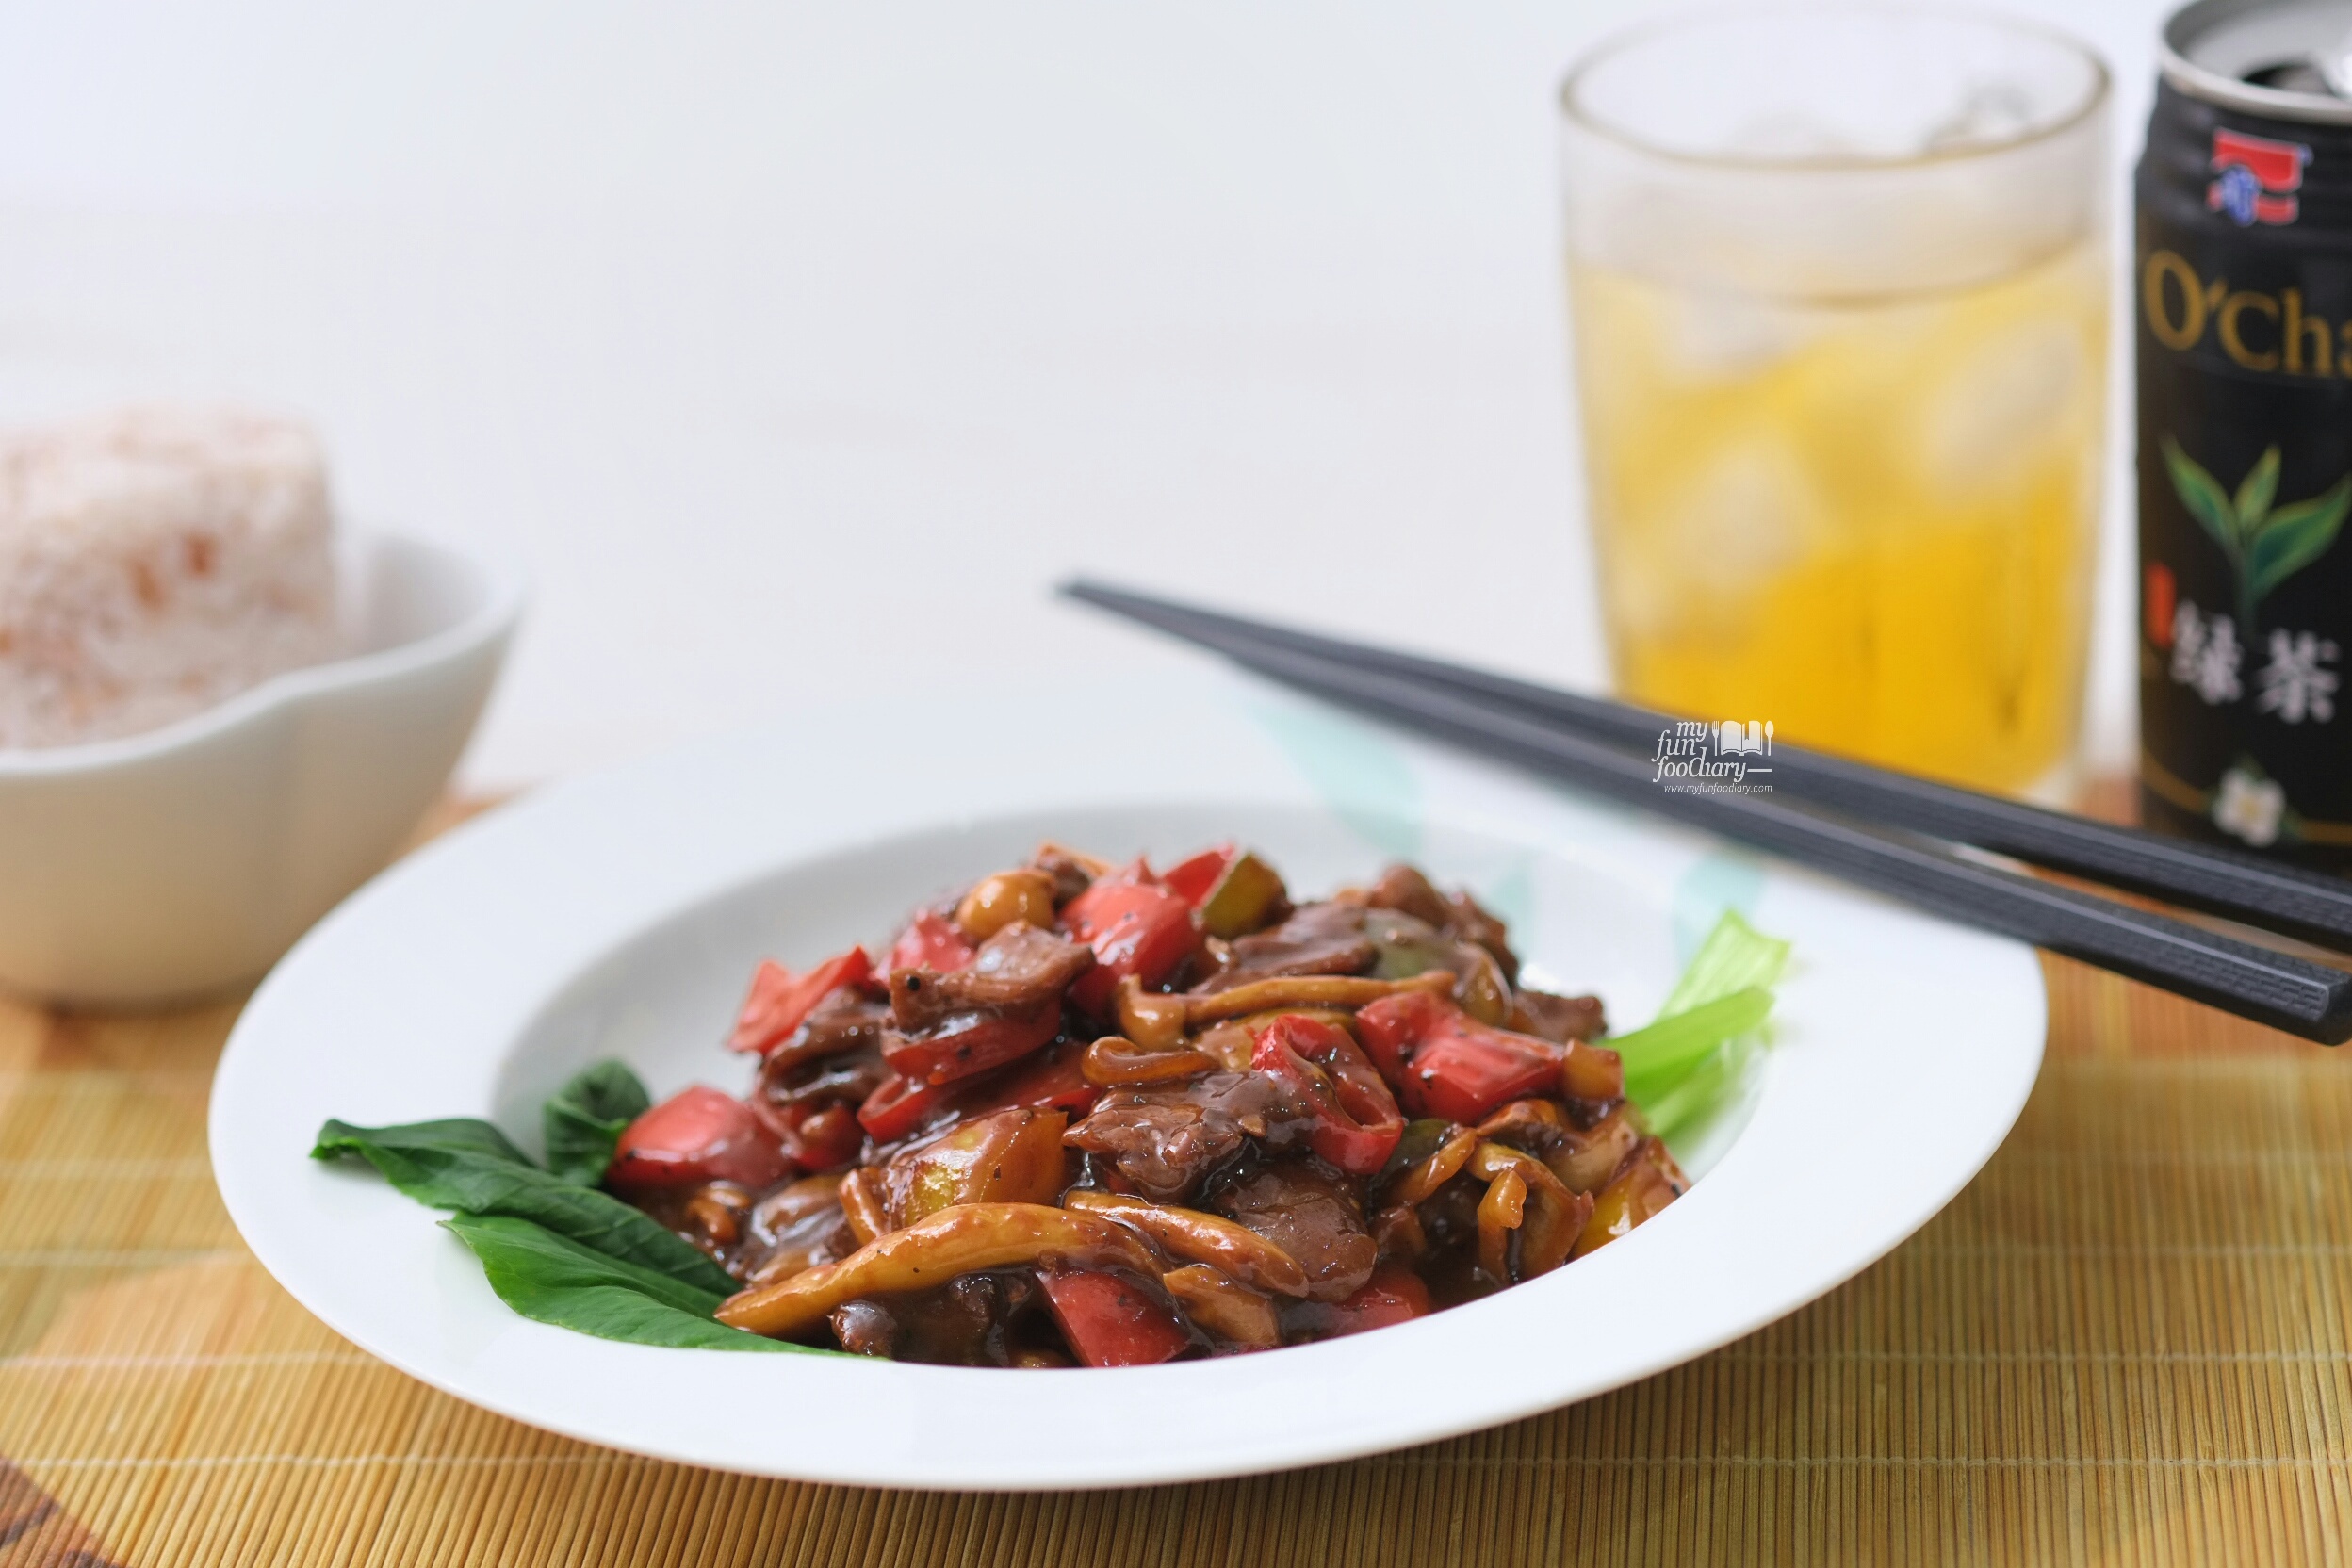 Black Pepper Beef with Mushroom by Mullie Myfunfoodiary